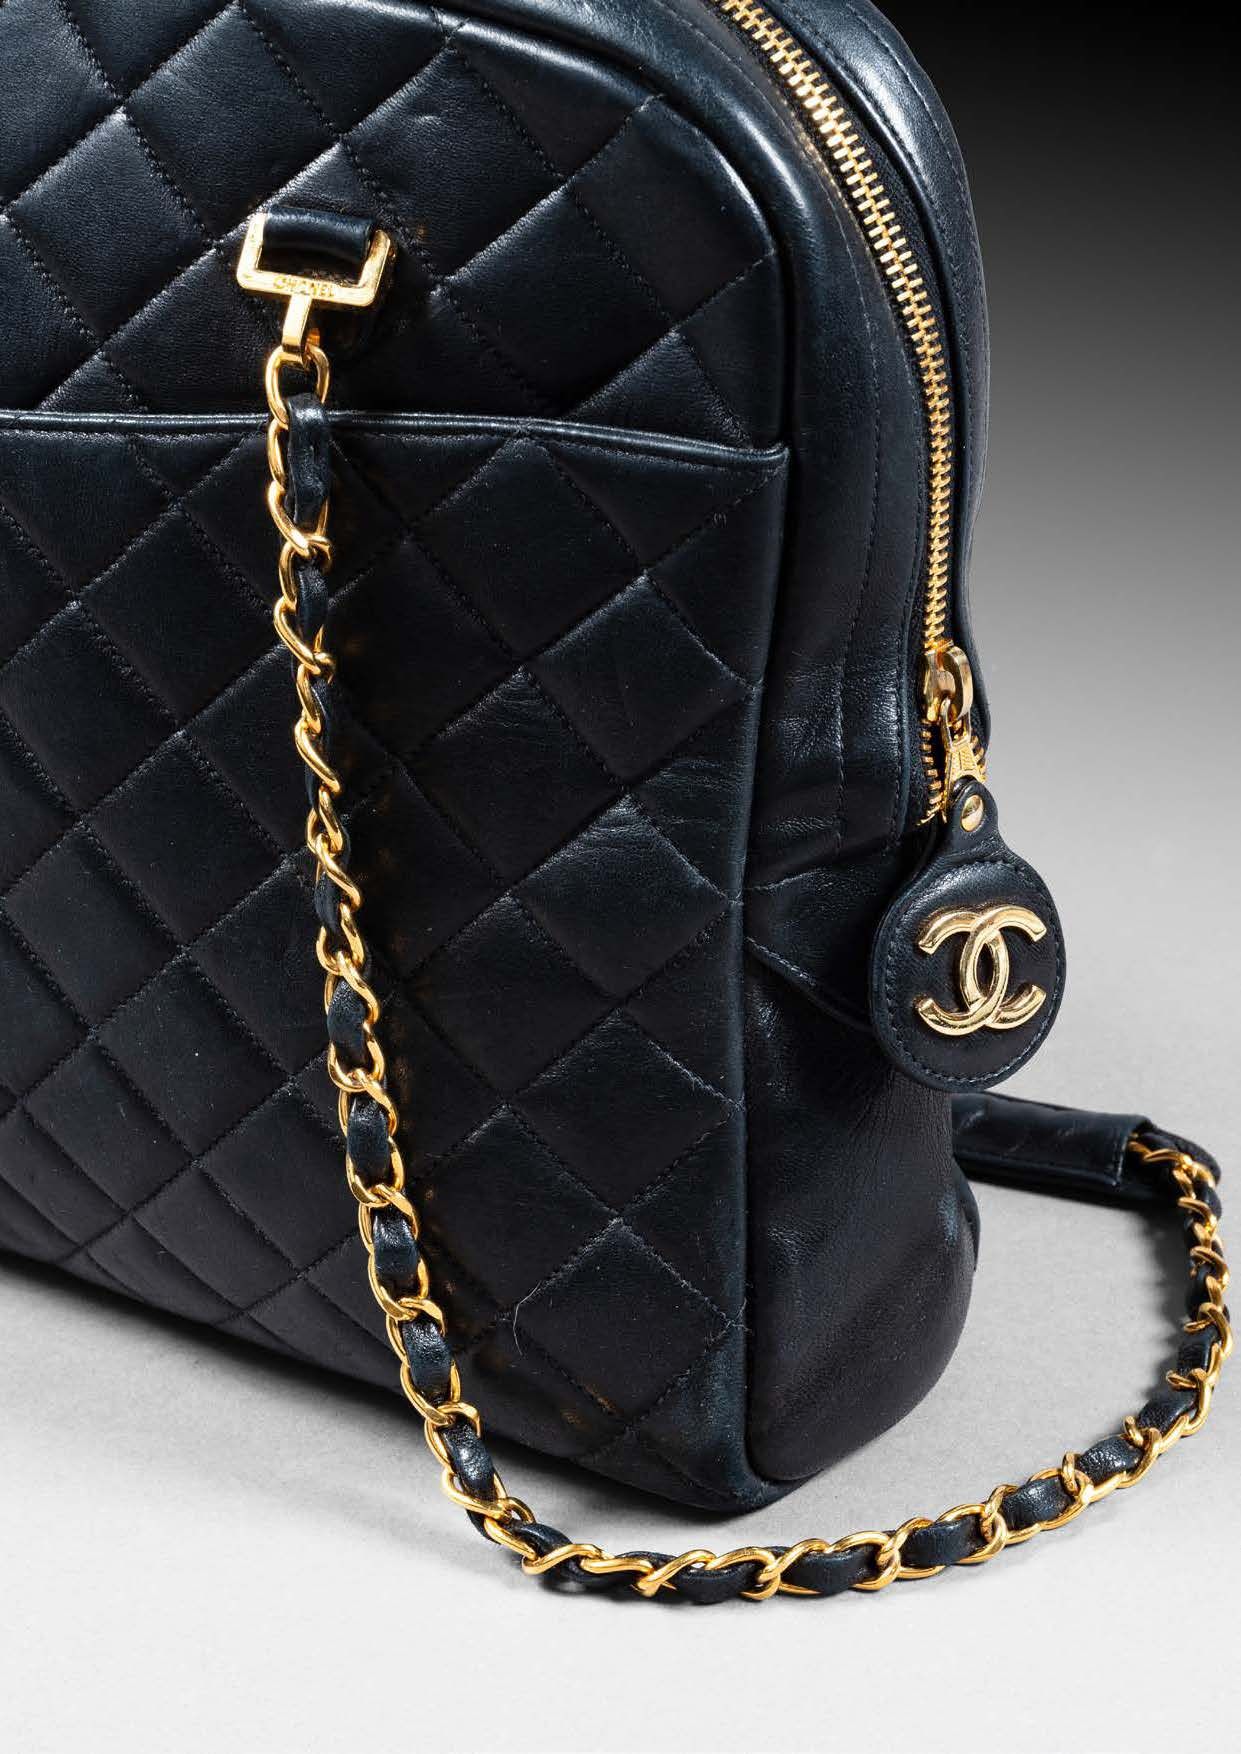 CHANEL Black quilted lambskin "Camera" bag, zipper closure, double gold metal ch&hellip;